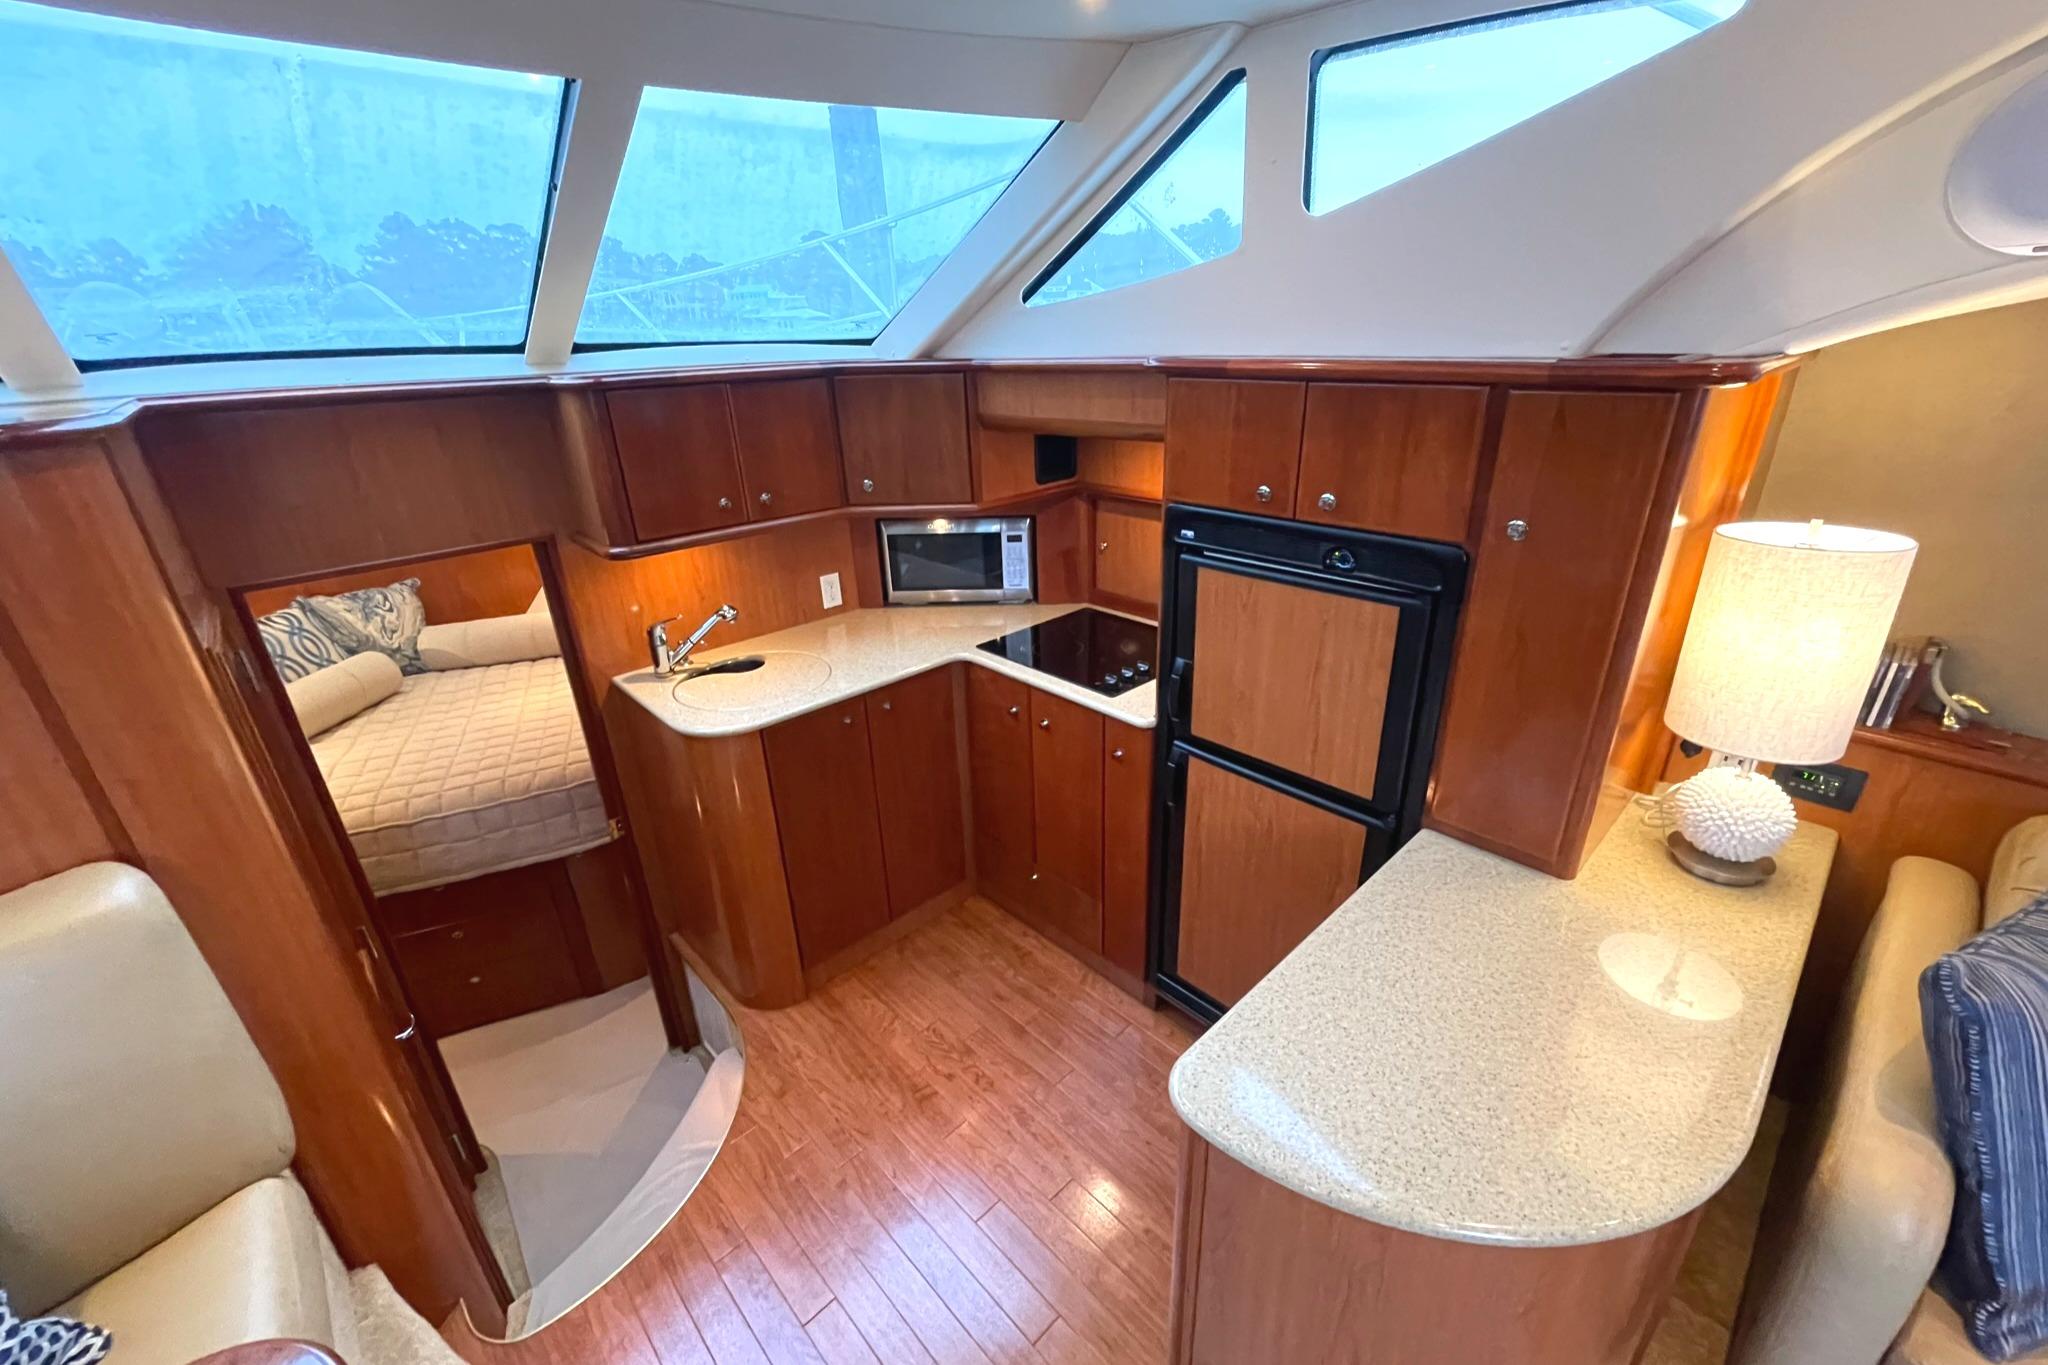 GALLEY OVERVIEW TO STBD